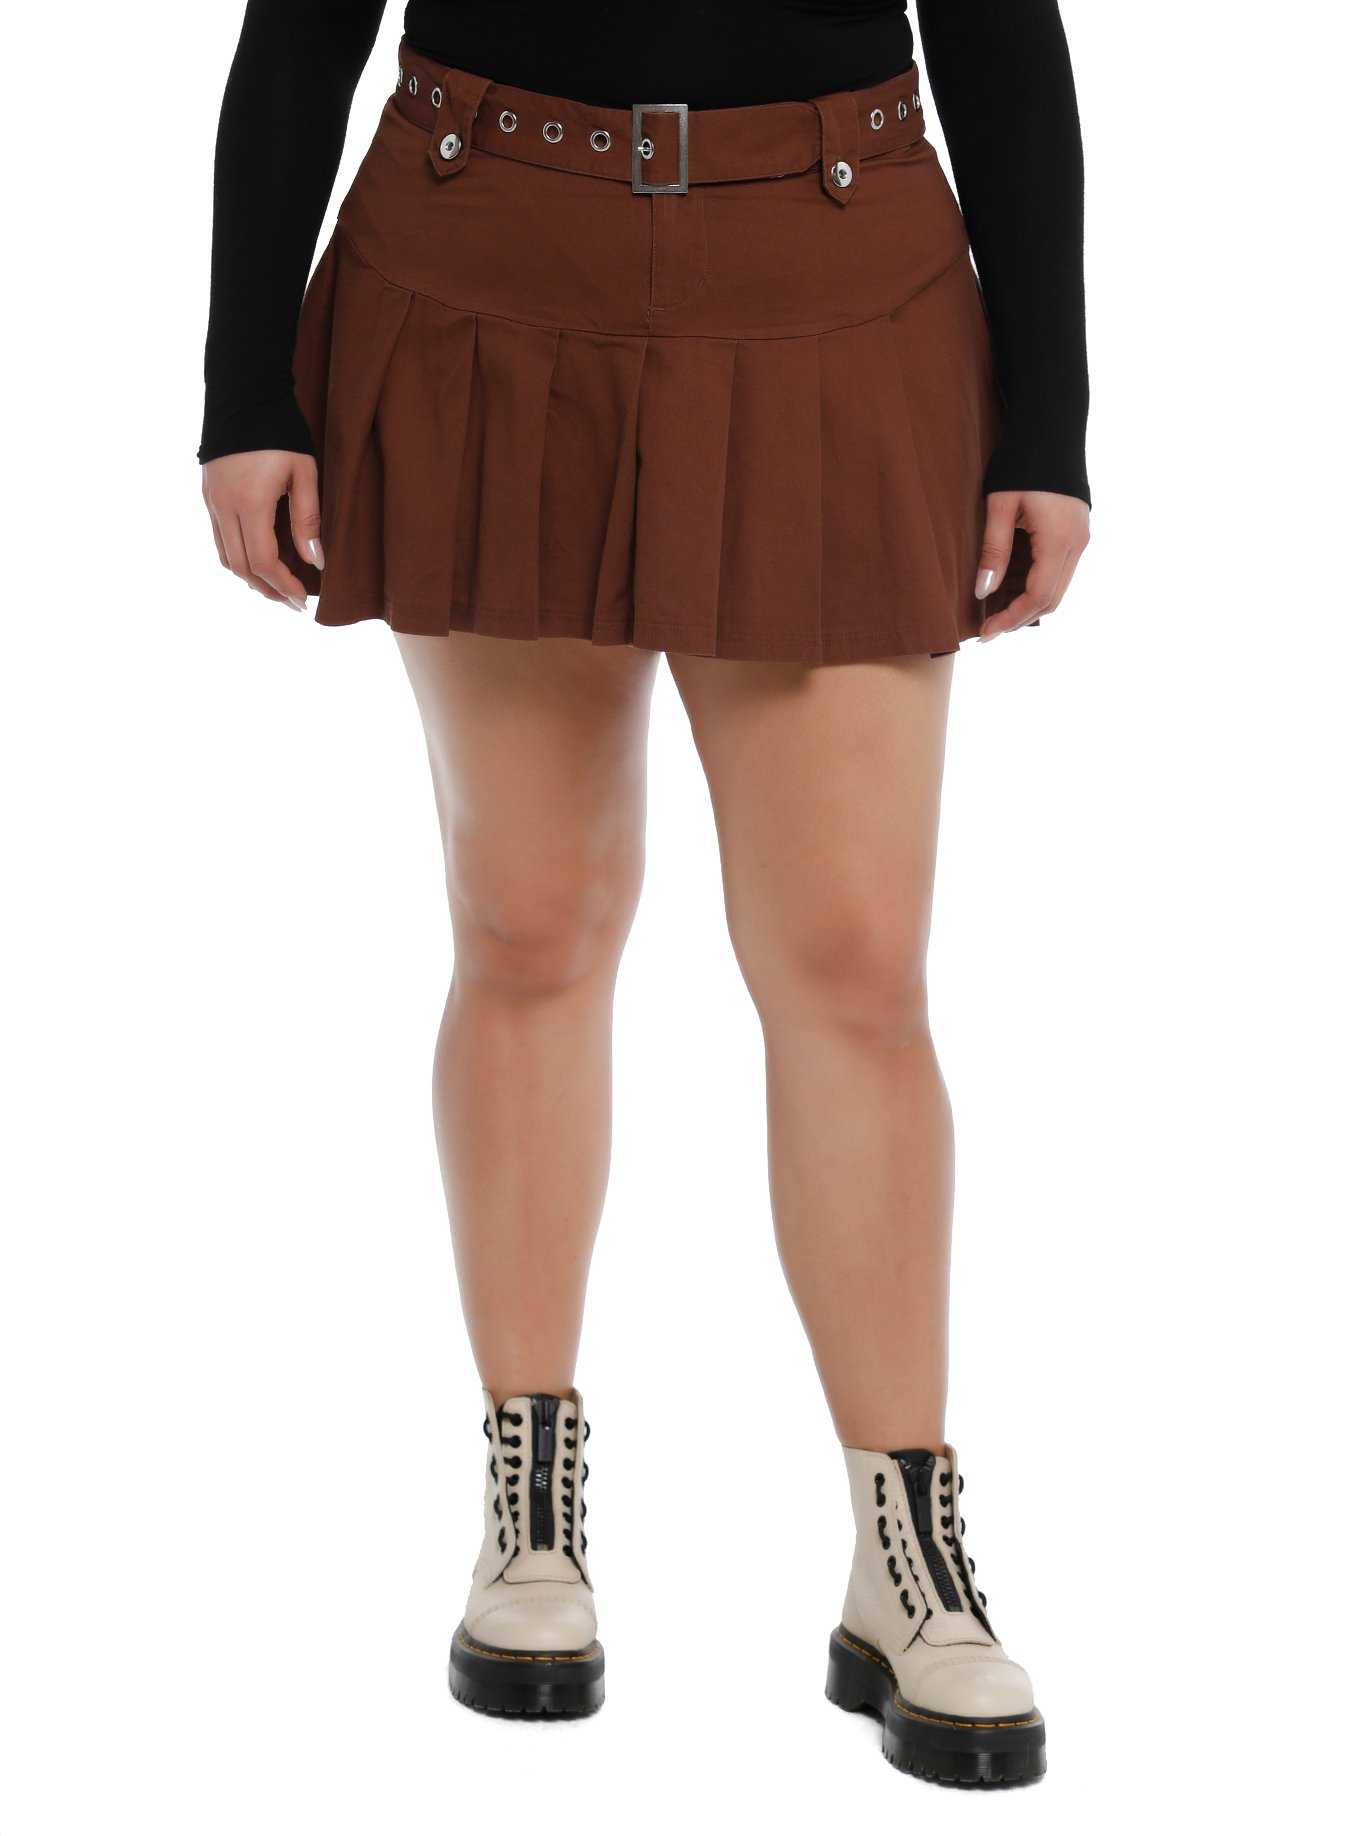 Brown Low-Rise Button Skirt With Belt Plus Size, , hi-res